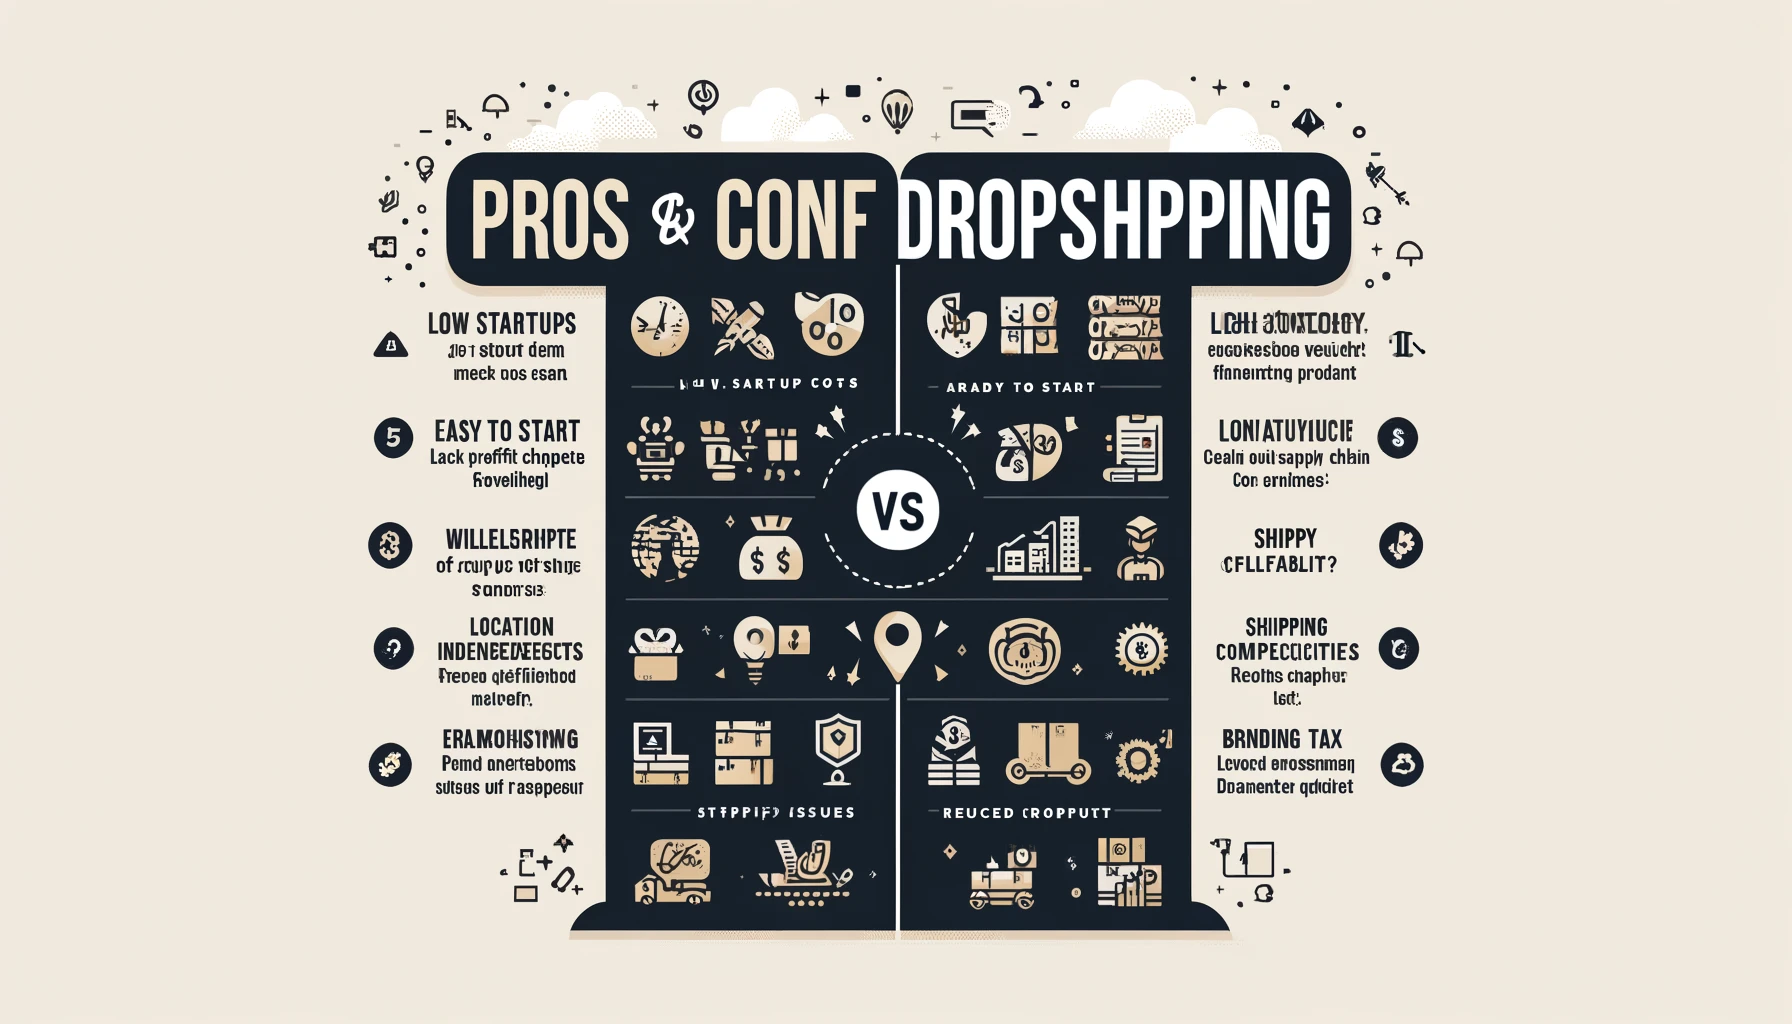 The Pros and Cons of Dropshipping